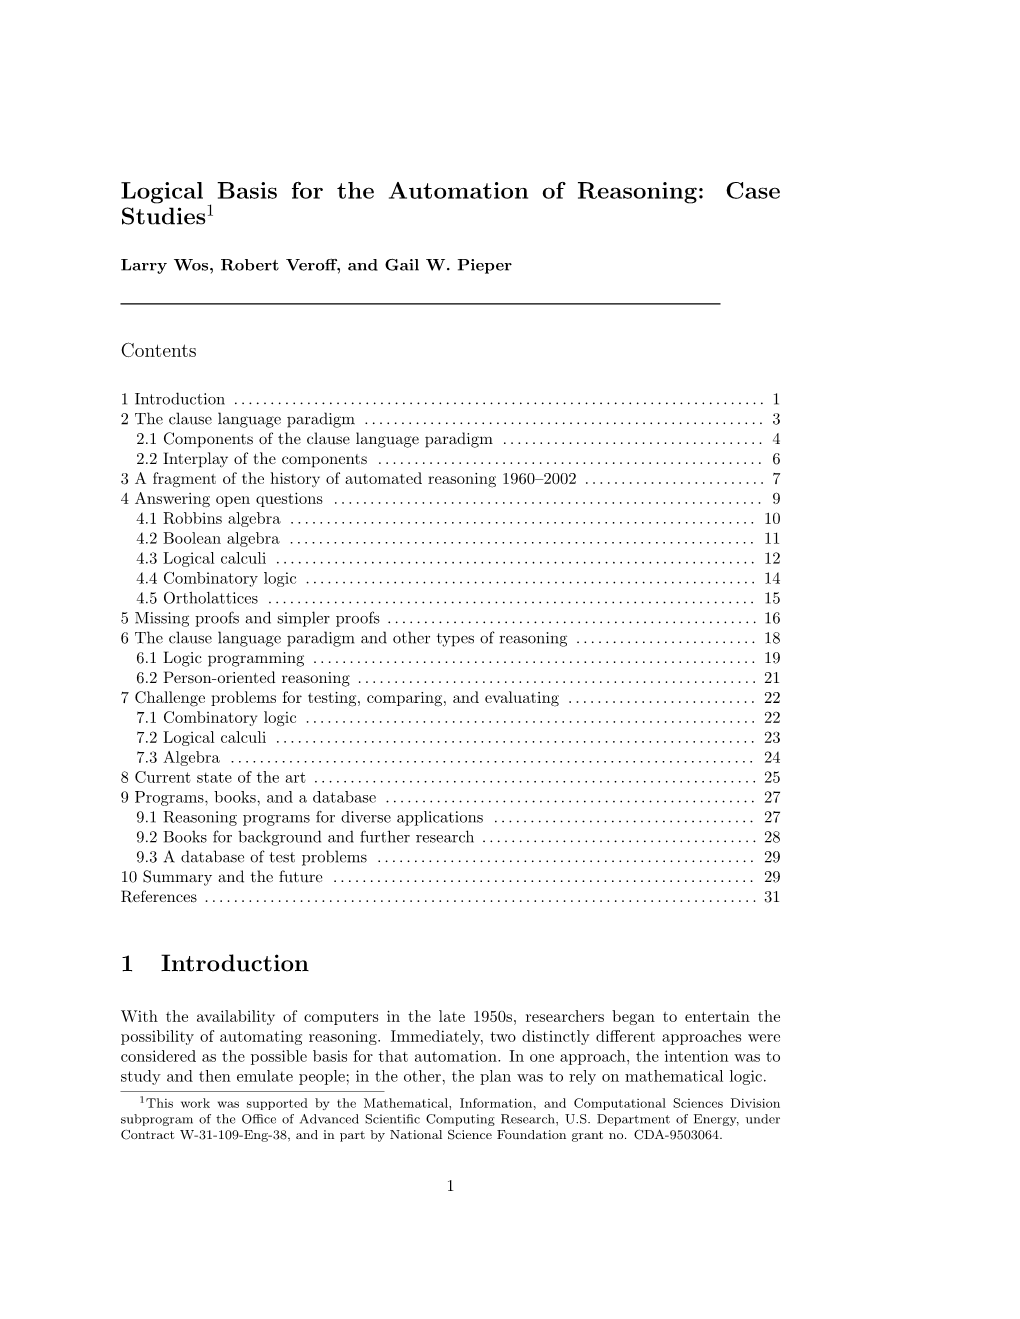 Logical Basis for the Automation of Reasoning: Case Studies1